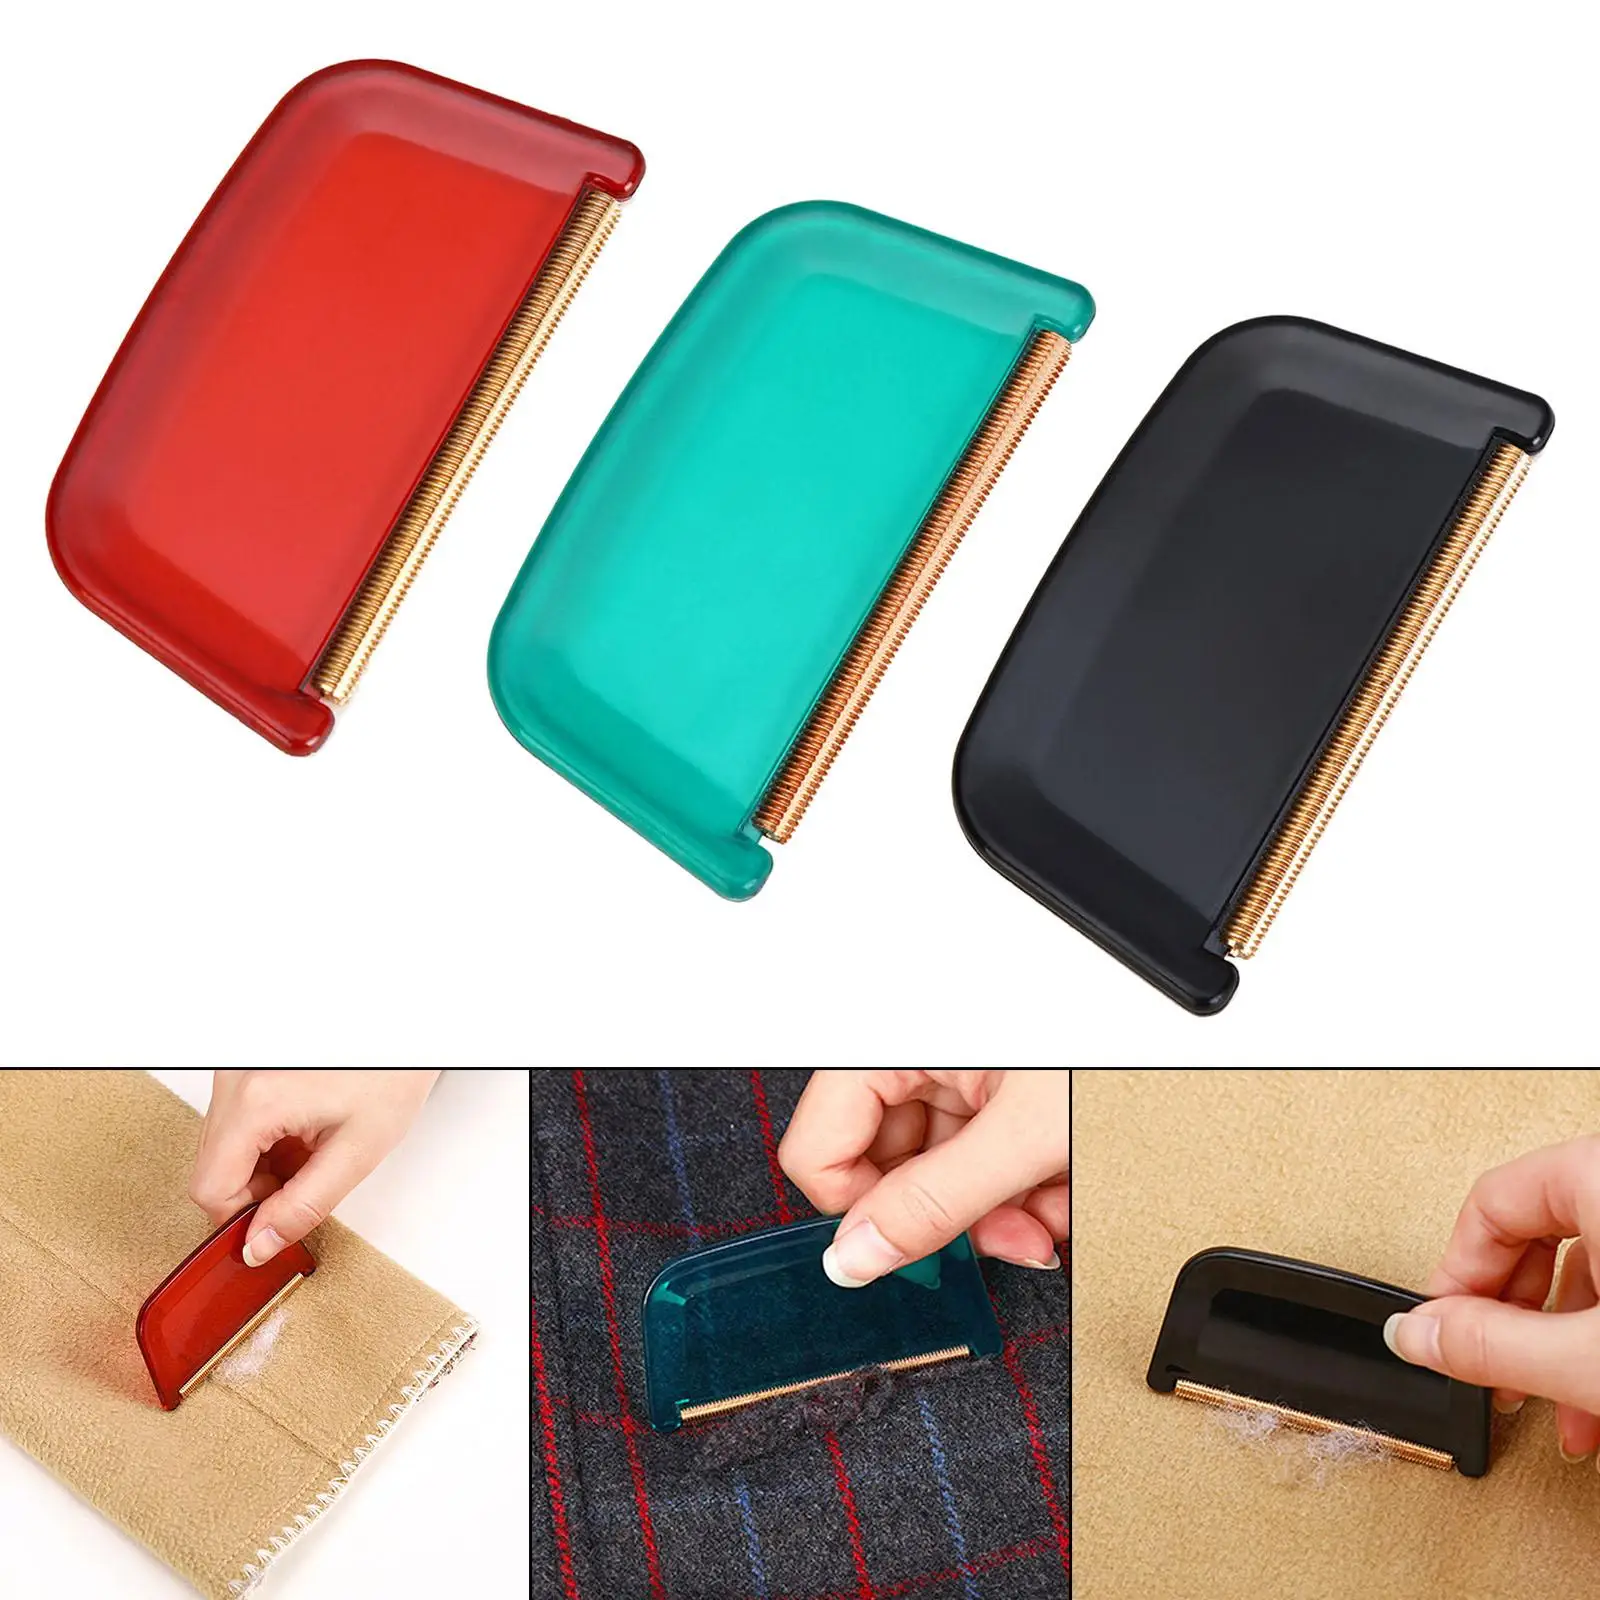 Wool Cashmere Comb Lint Fuzz Balls Cleaning Tools, Vacation Use Simple to Grip DE Fuzzing Durable Easily Store for Seasonal Use